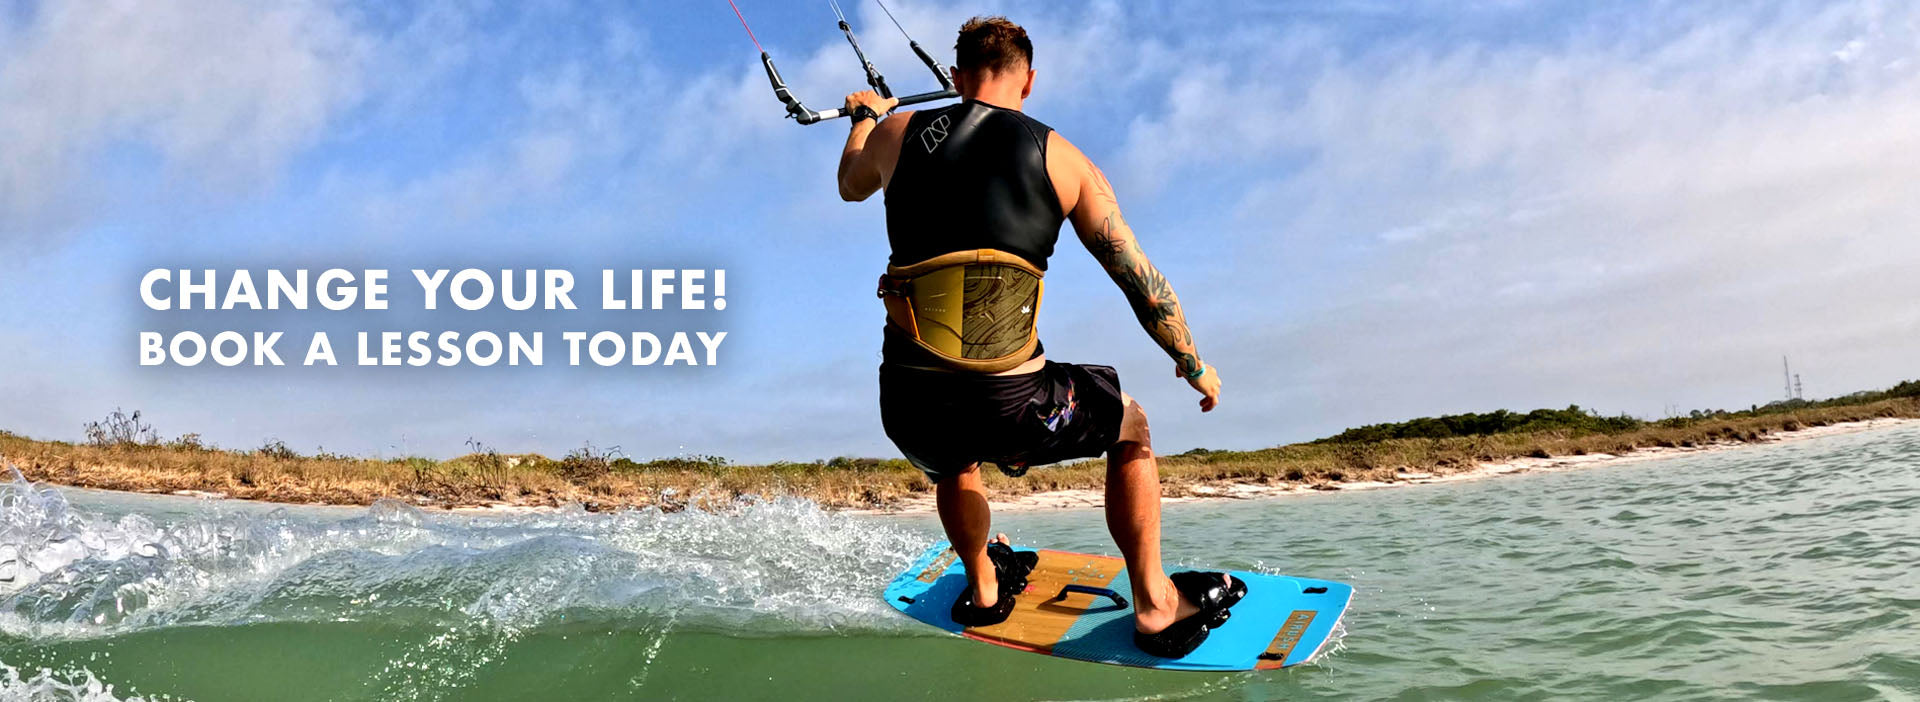 Book a kiteboarding lesson in Tampa.jpg__PID:bbfc07cf-fc1a-48a9-ae0b-33355203fc1a